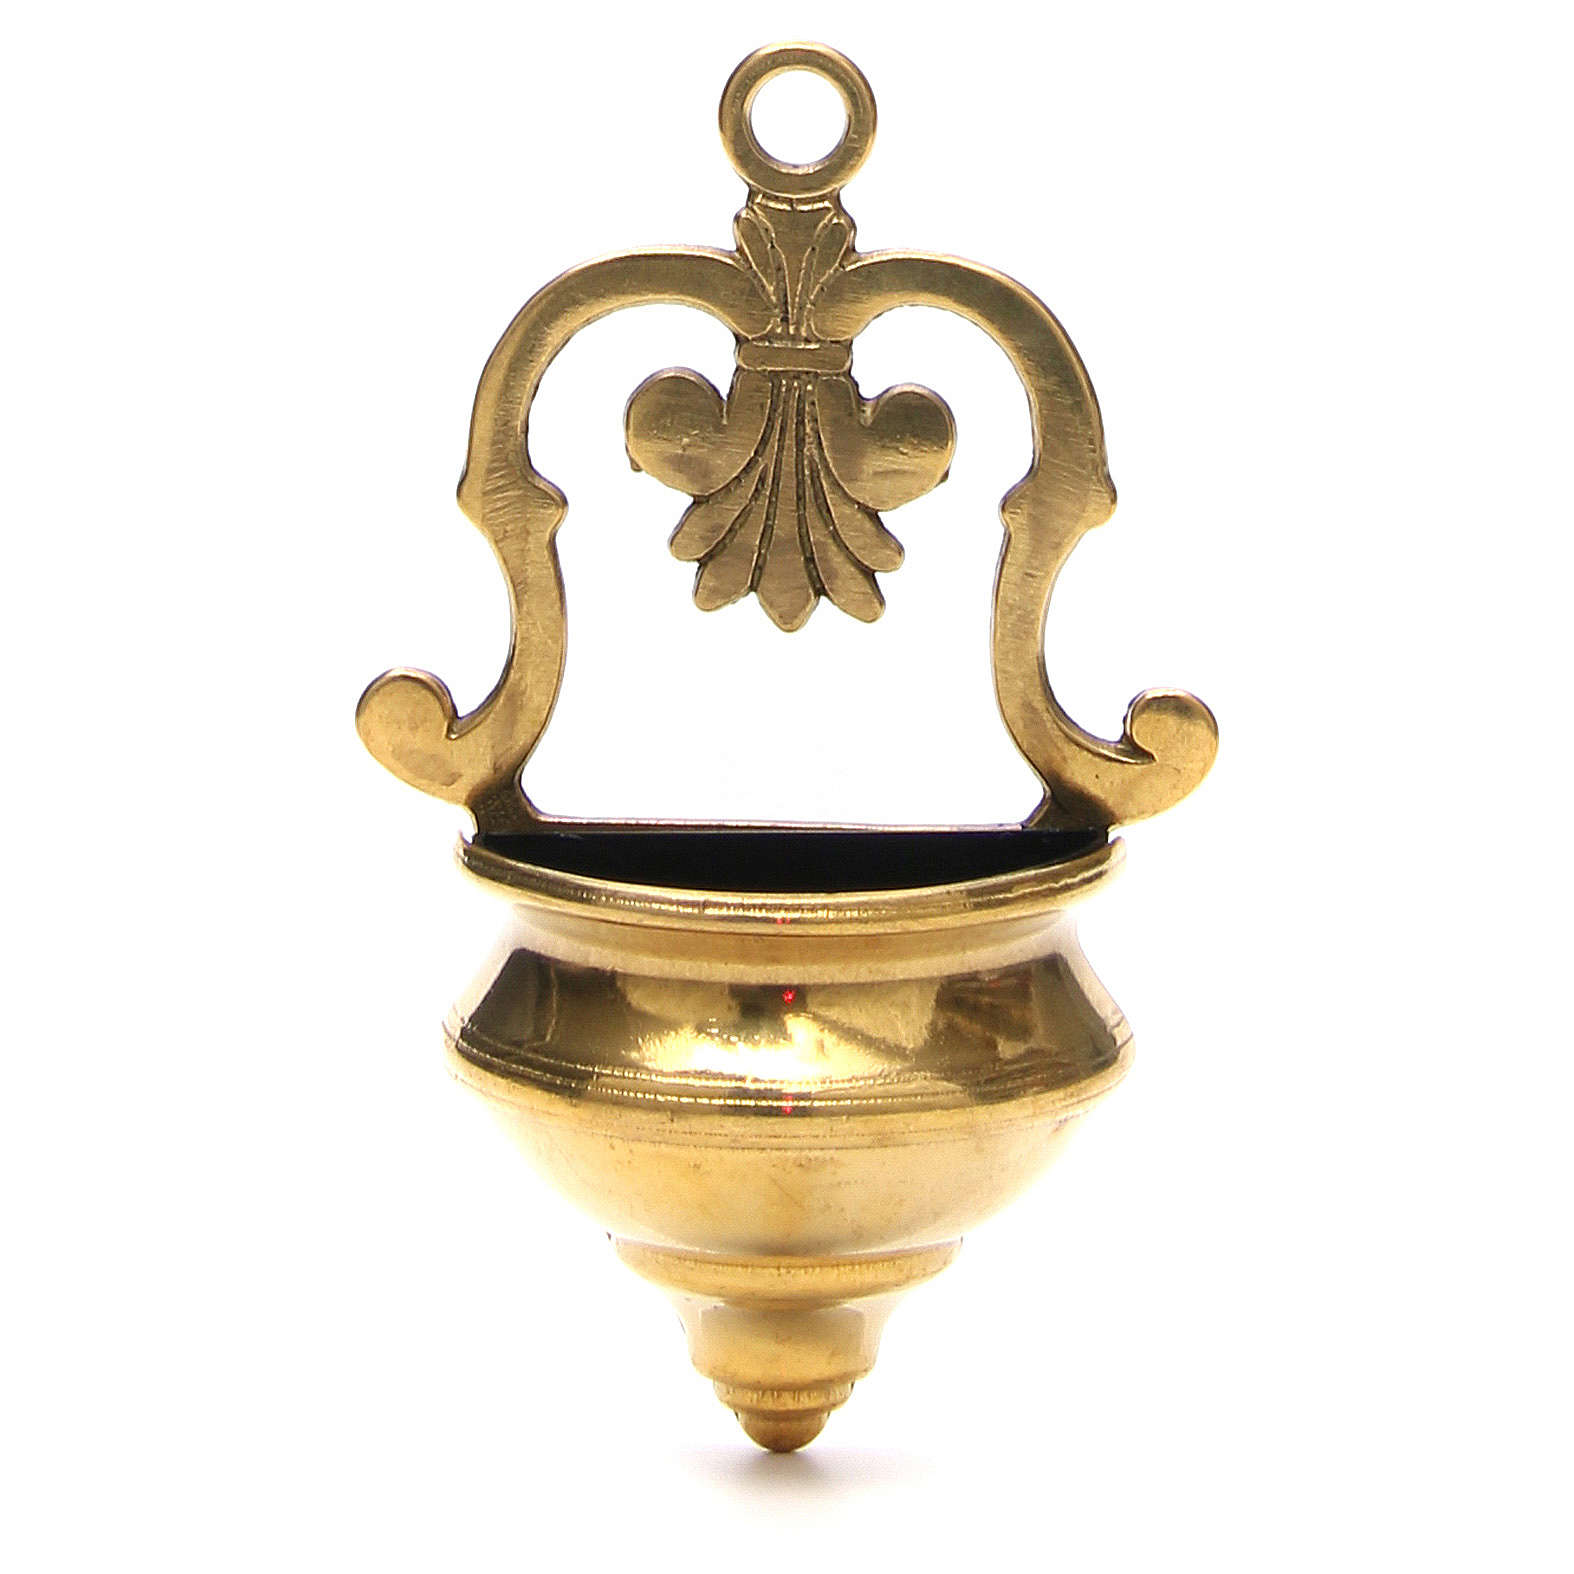 Holy water font in gold-plated brass | online sales on HOLYART.co.uk